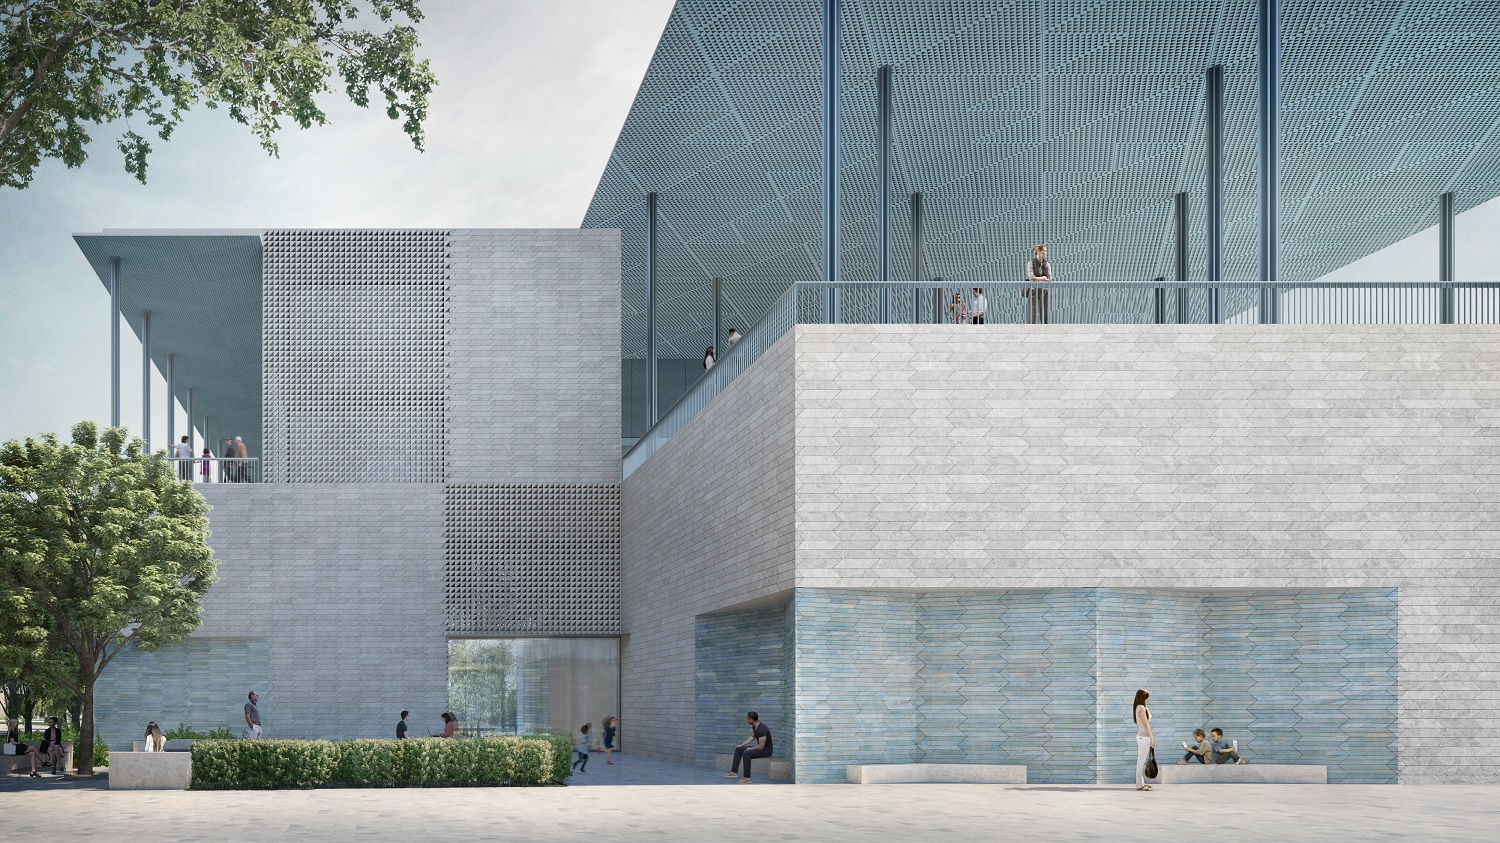 Rendering of the exterior of Ismaili Center Houston a white brick building with crisp angles showing pedestrians walking and sitting in the public spaces